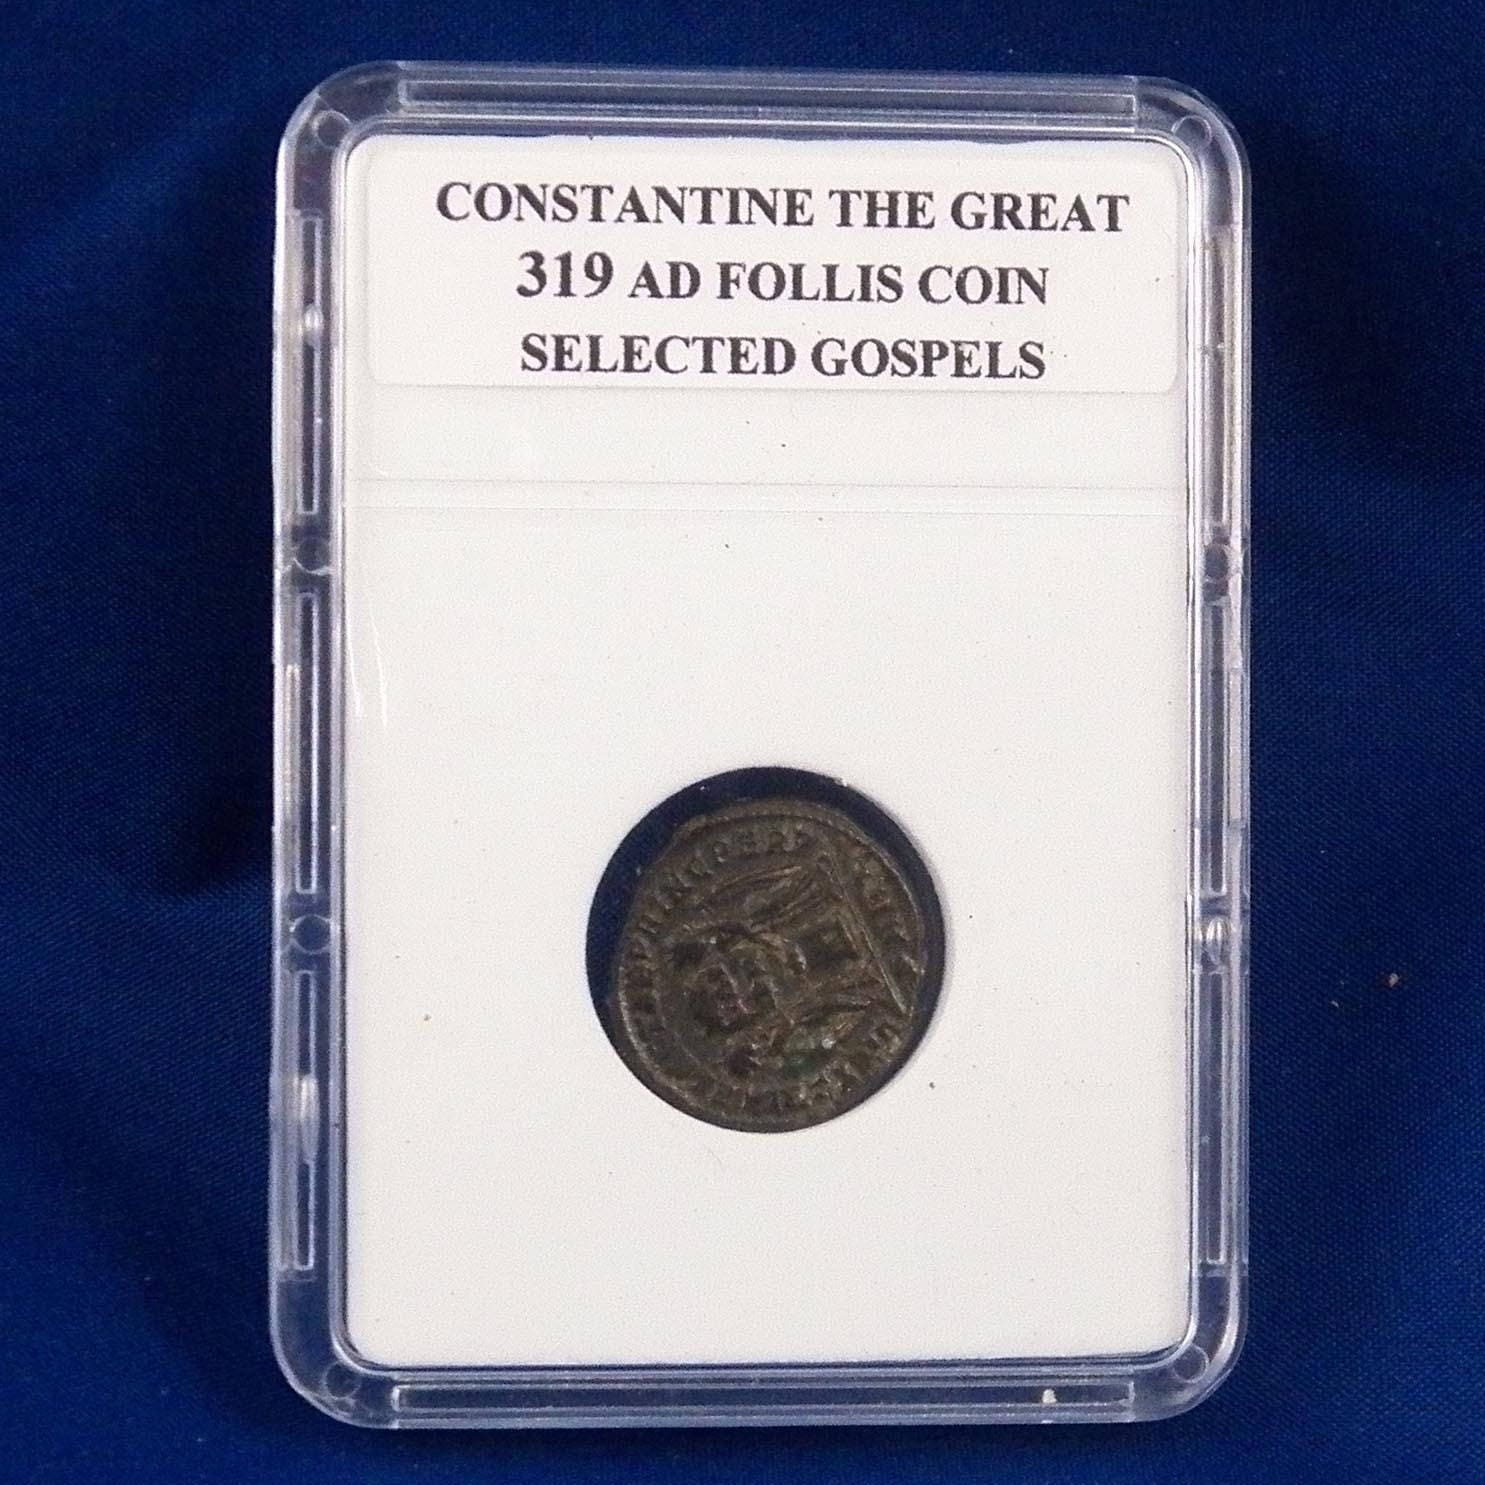 Constantine the Great Ancient Coin 319 AD Follis Coin - Etsy